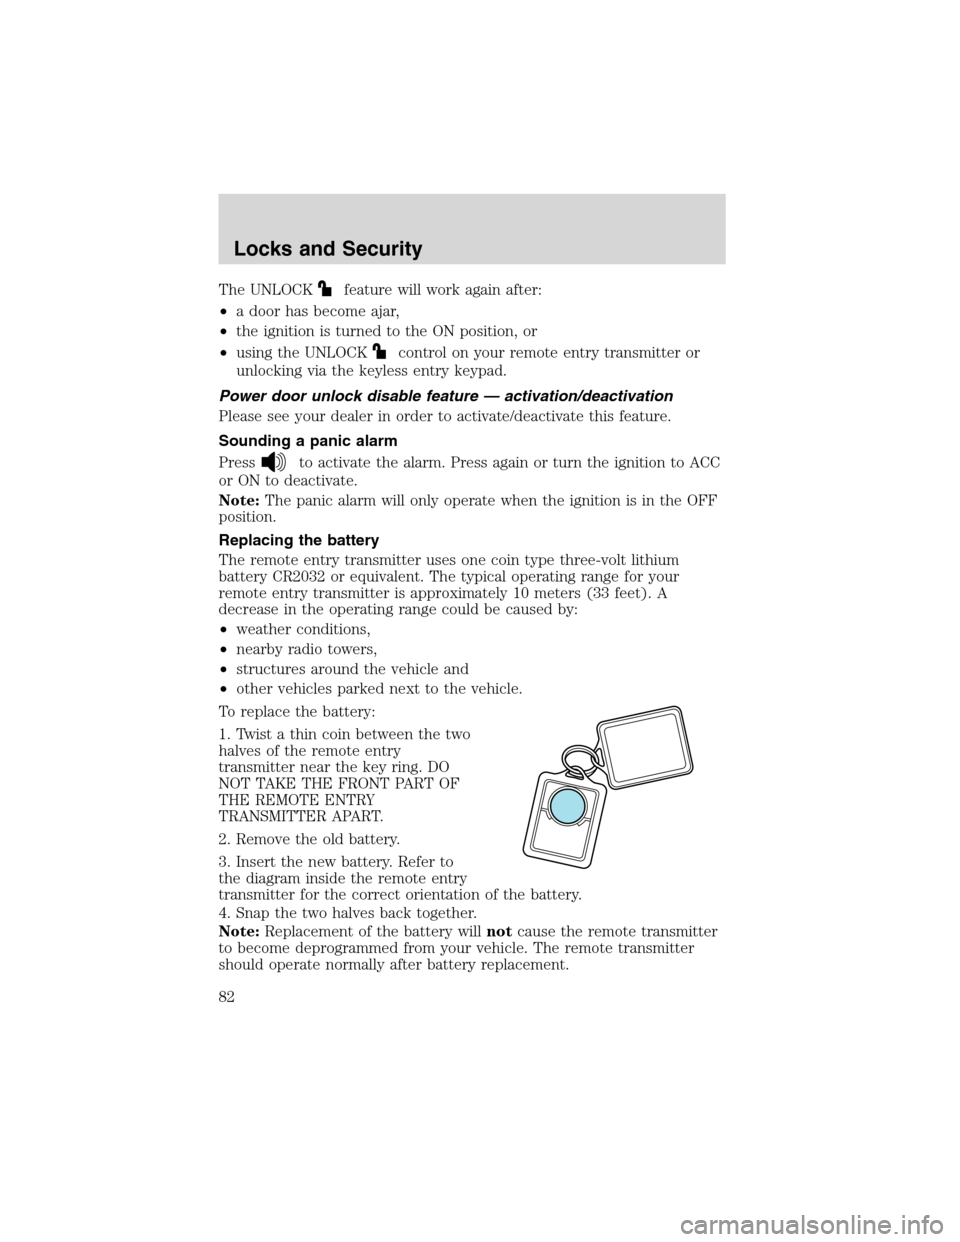 FORD F150 2003 10.G Owners Manual The UNLOCKfeature will work again after:
•a door has become ajar,
•the ignition is turned to the ON position, or
•using the UNLOCK
control on your remote entry transmitter or
unlocking via the k